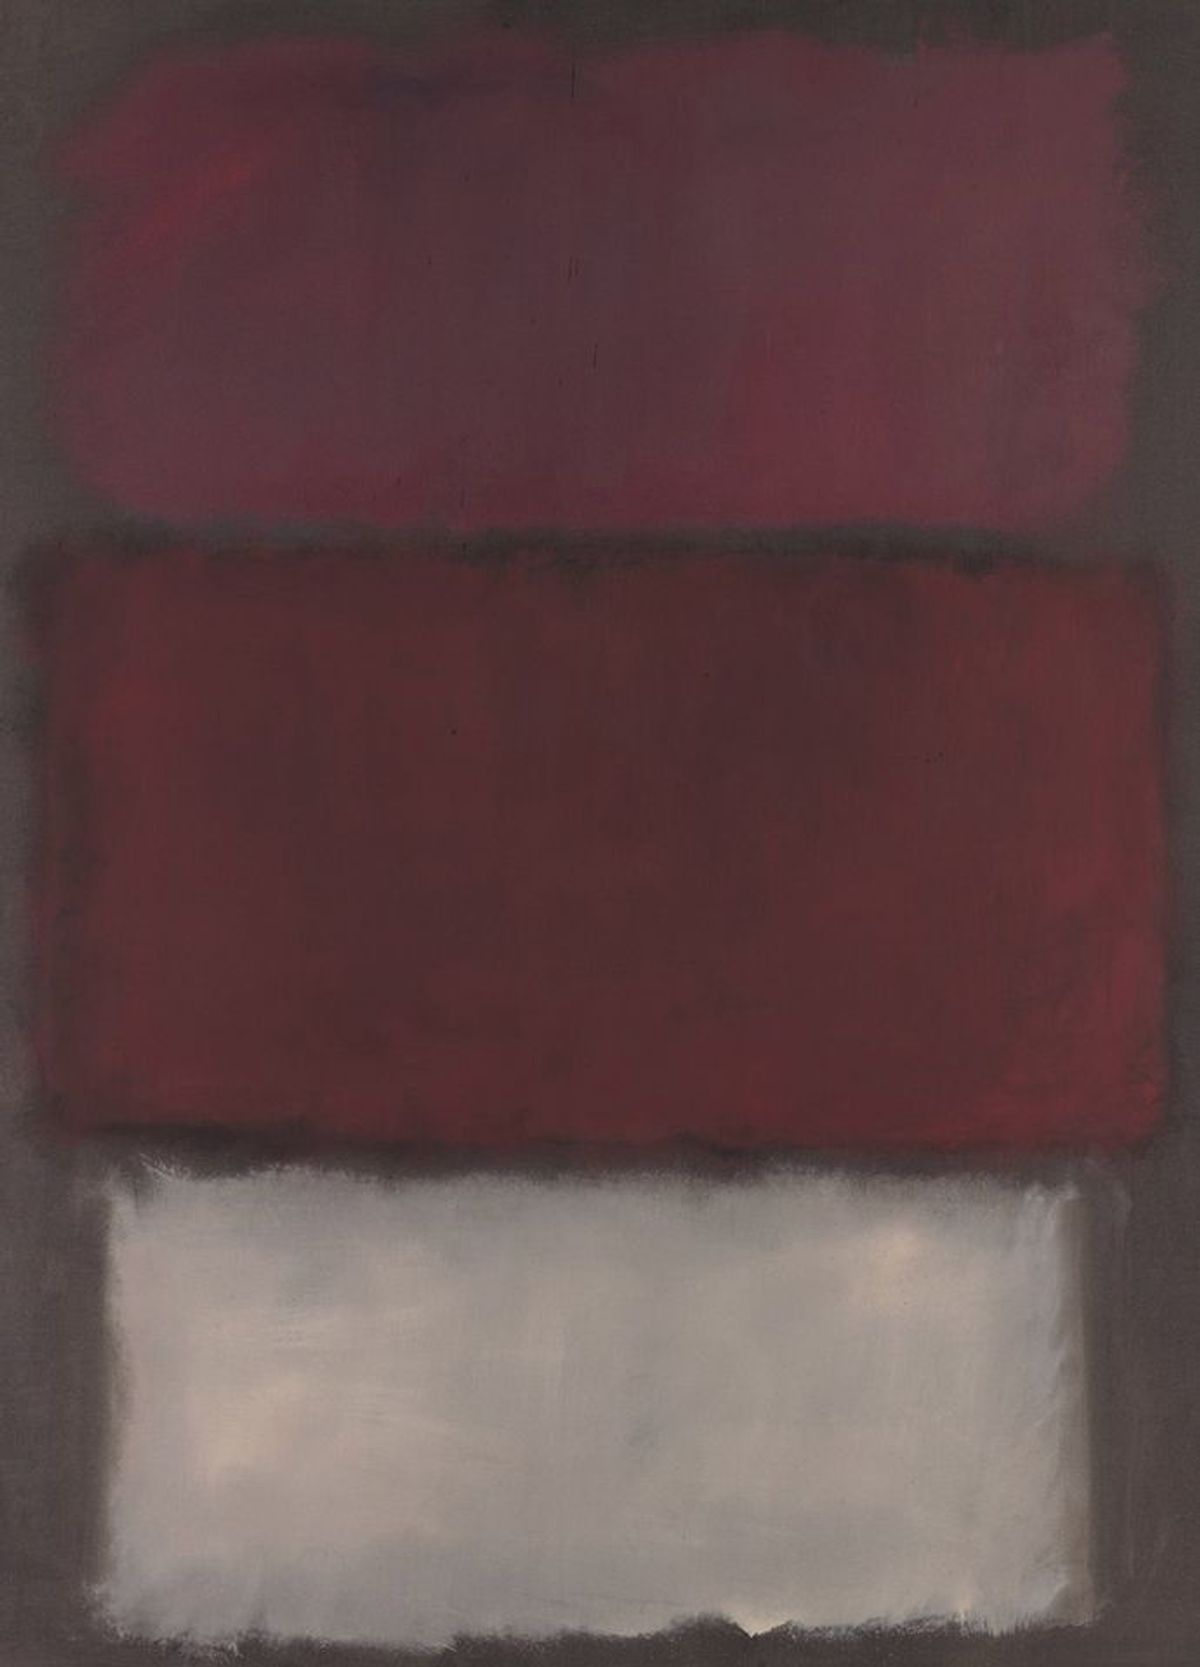 SFMoMA sold Rothko’s Untitled (1960)—acquired in discussion with the artist—in order to support the diversification of its collection Photo courtesy of Sotheby’s; © 1998 Kate Rothko Prizel and Christopher Rothko/Artists Rights Society